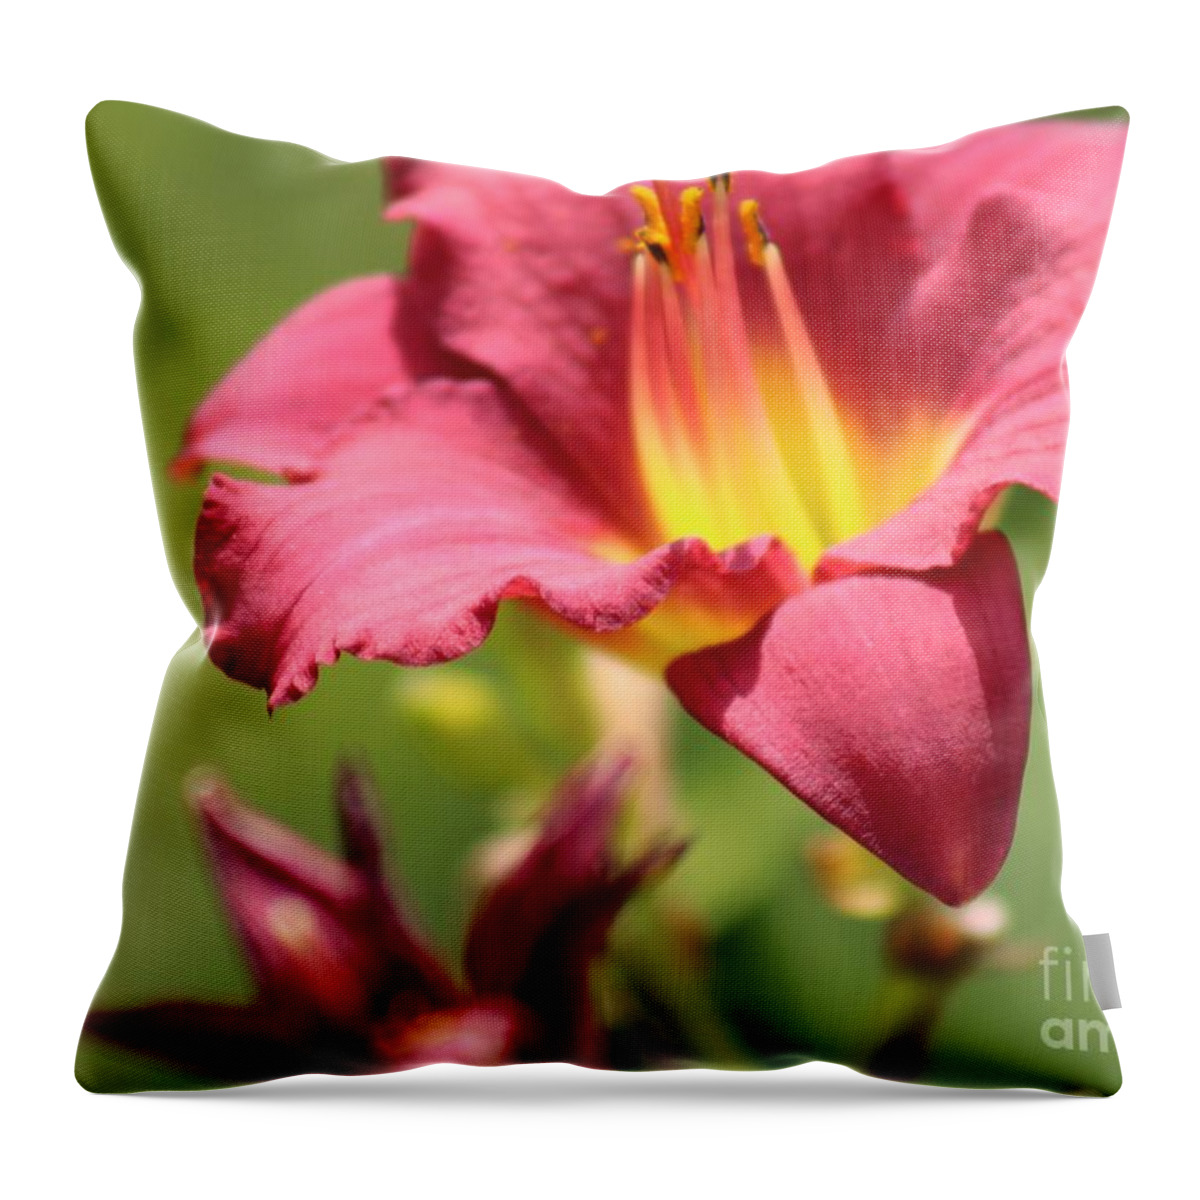 Yellow Throw Pillow featuring the photograph Nature's Beauty 44 by Deena Withycombe